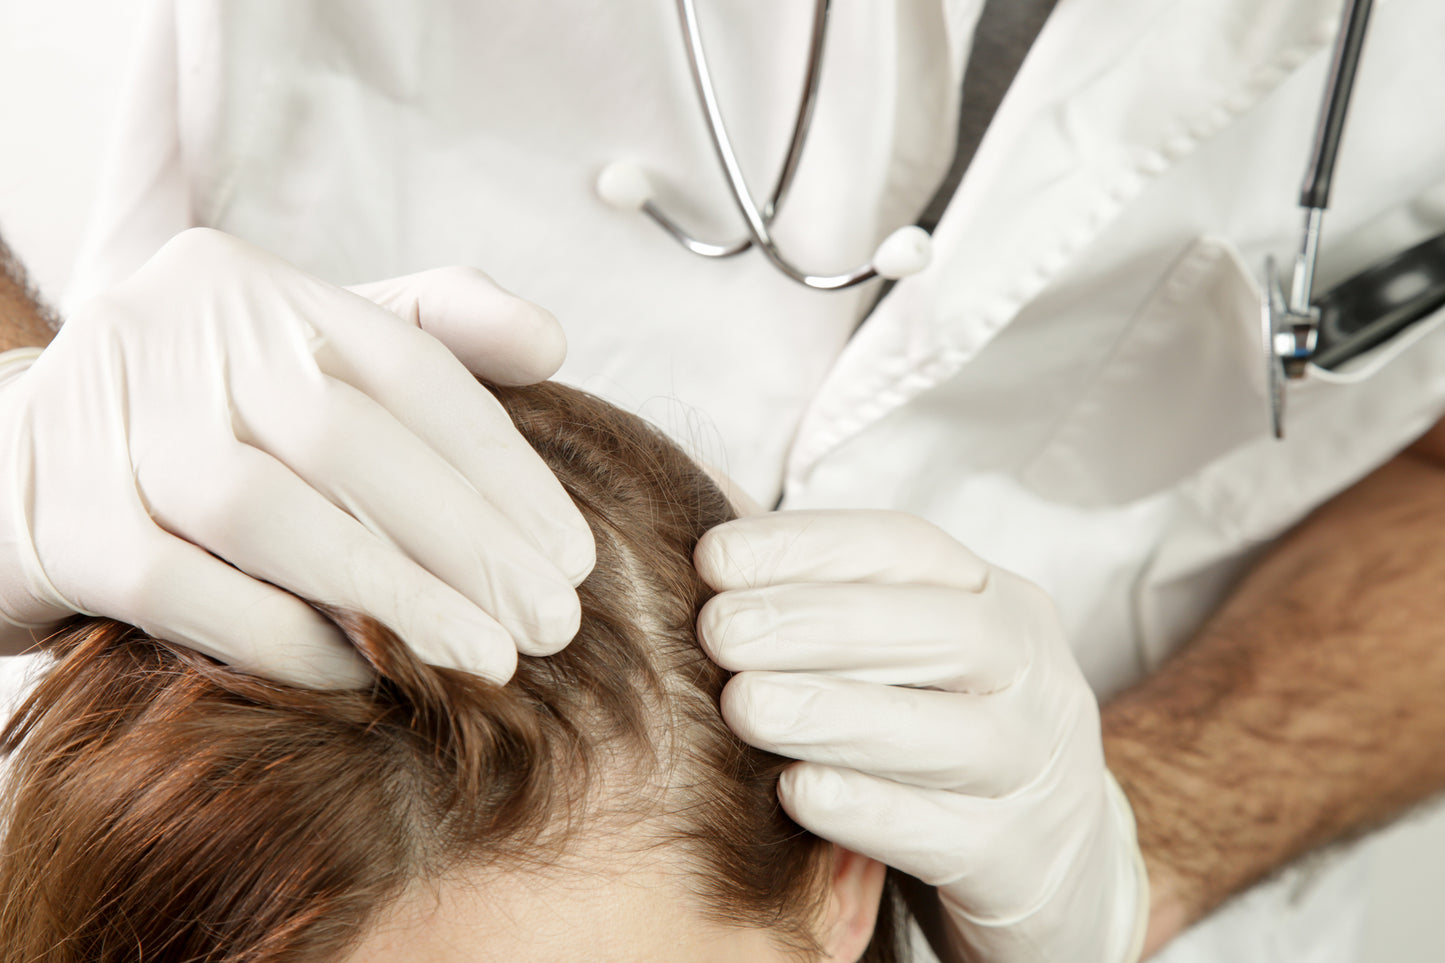 Will Bioidentical Hormones Help with Hair Loss?